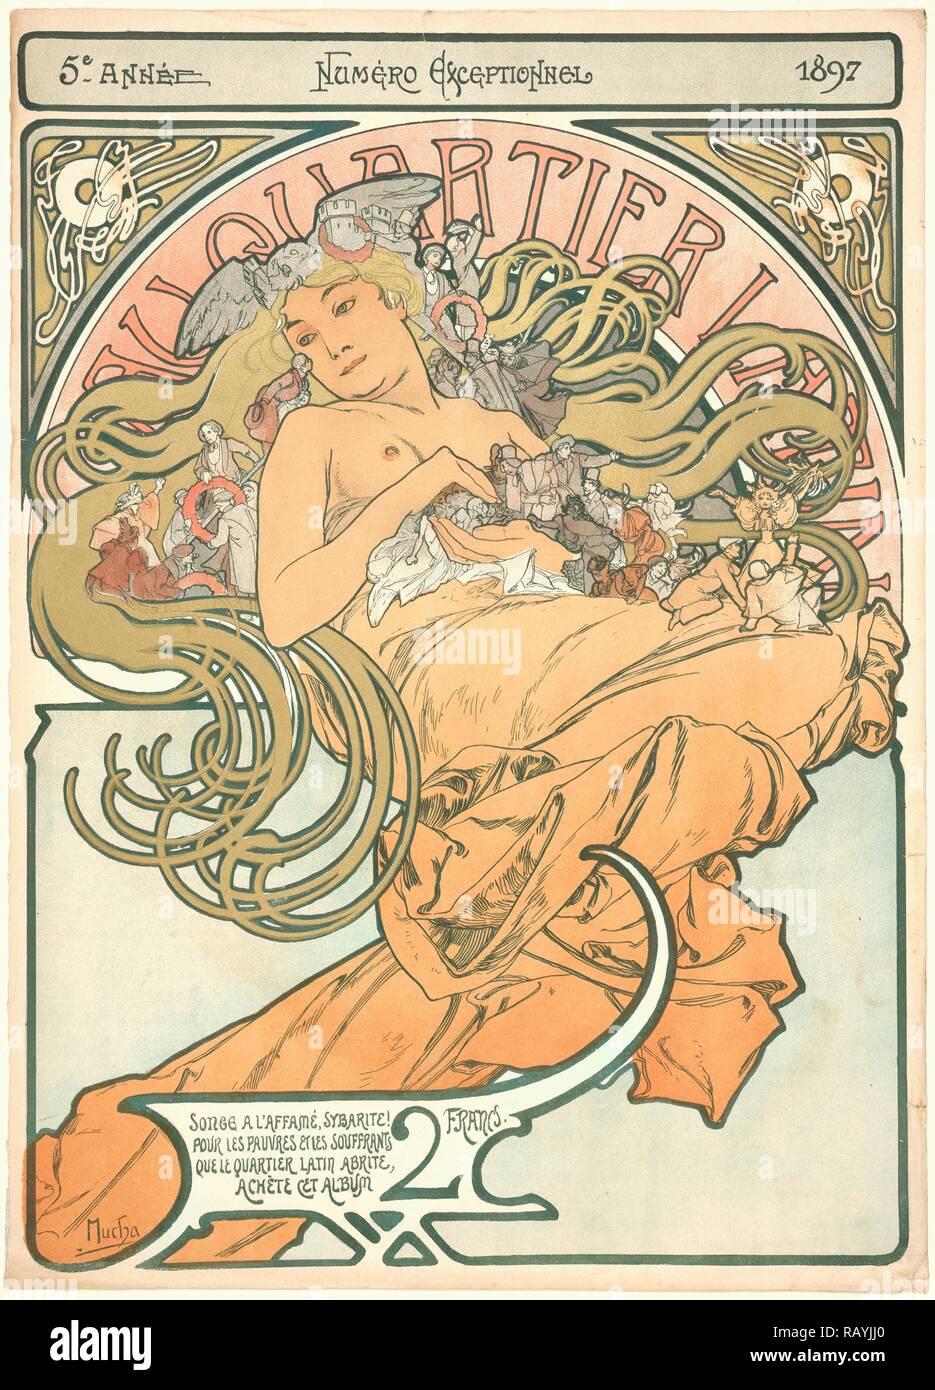 Alphonse Mucha (Czech, 1860 - 1939). Au Quartier Latin, 1897. Color lithograph printed in 6 colors on wove paper reimagined Stock Photo